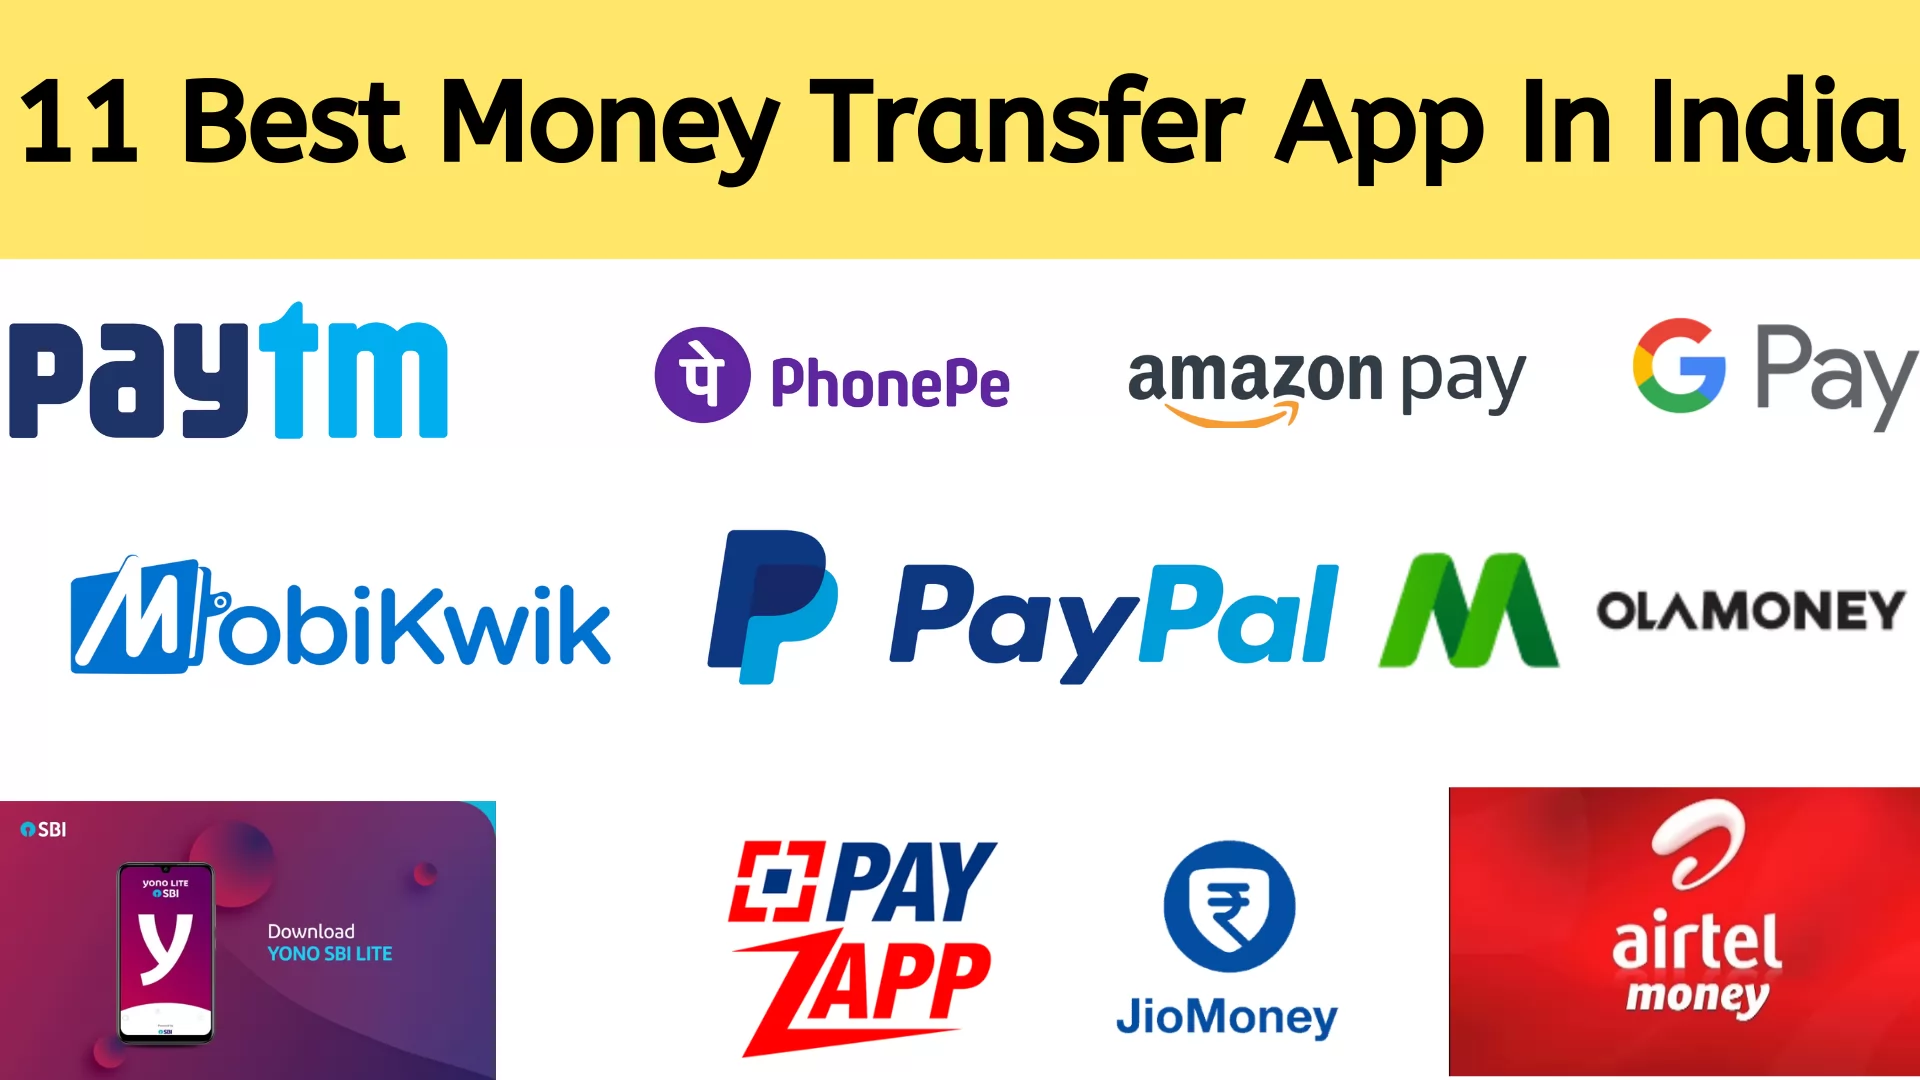 11 Best Money Transfer App In India-UPI And E-Wallet Payment Apps List